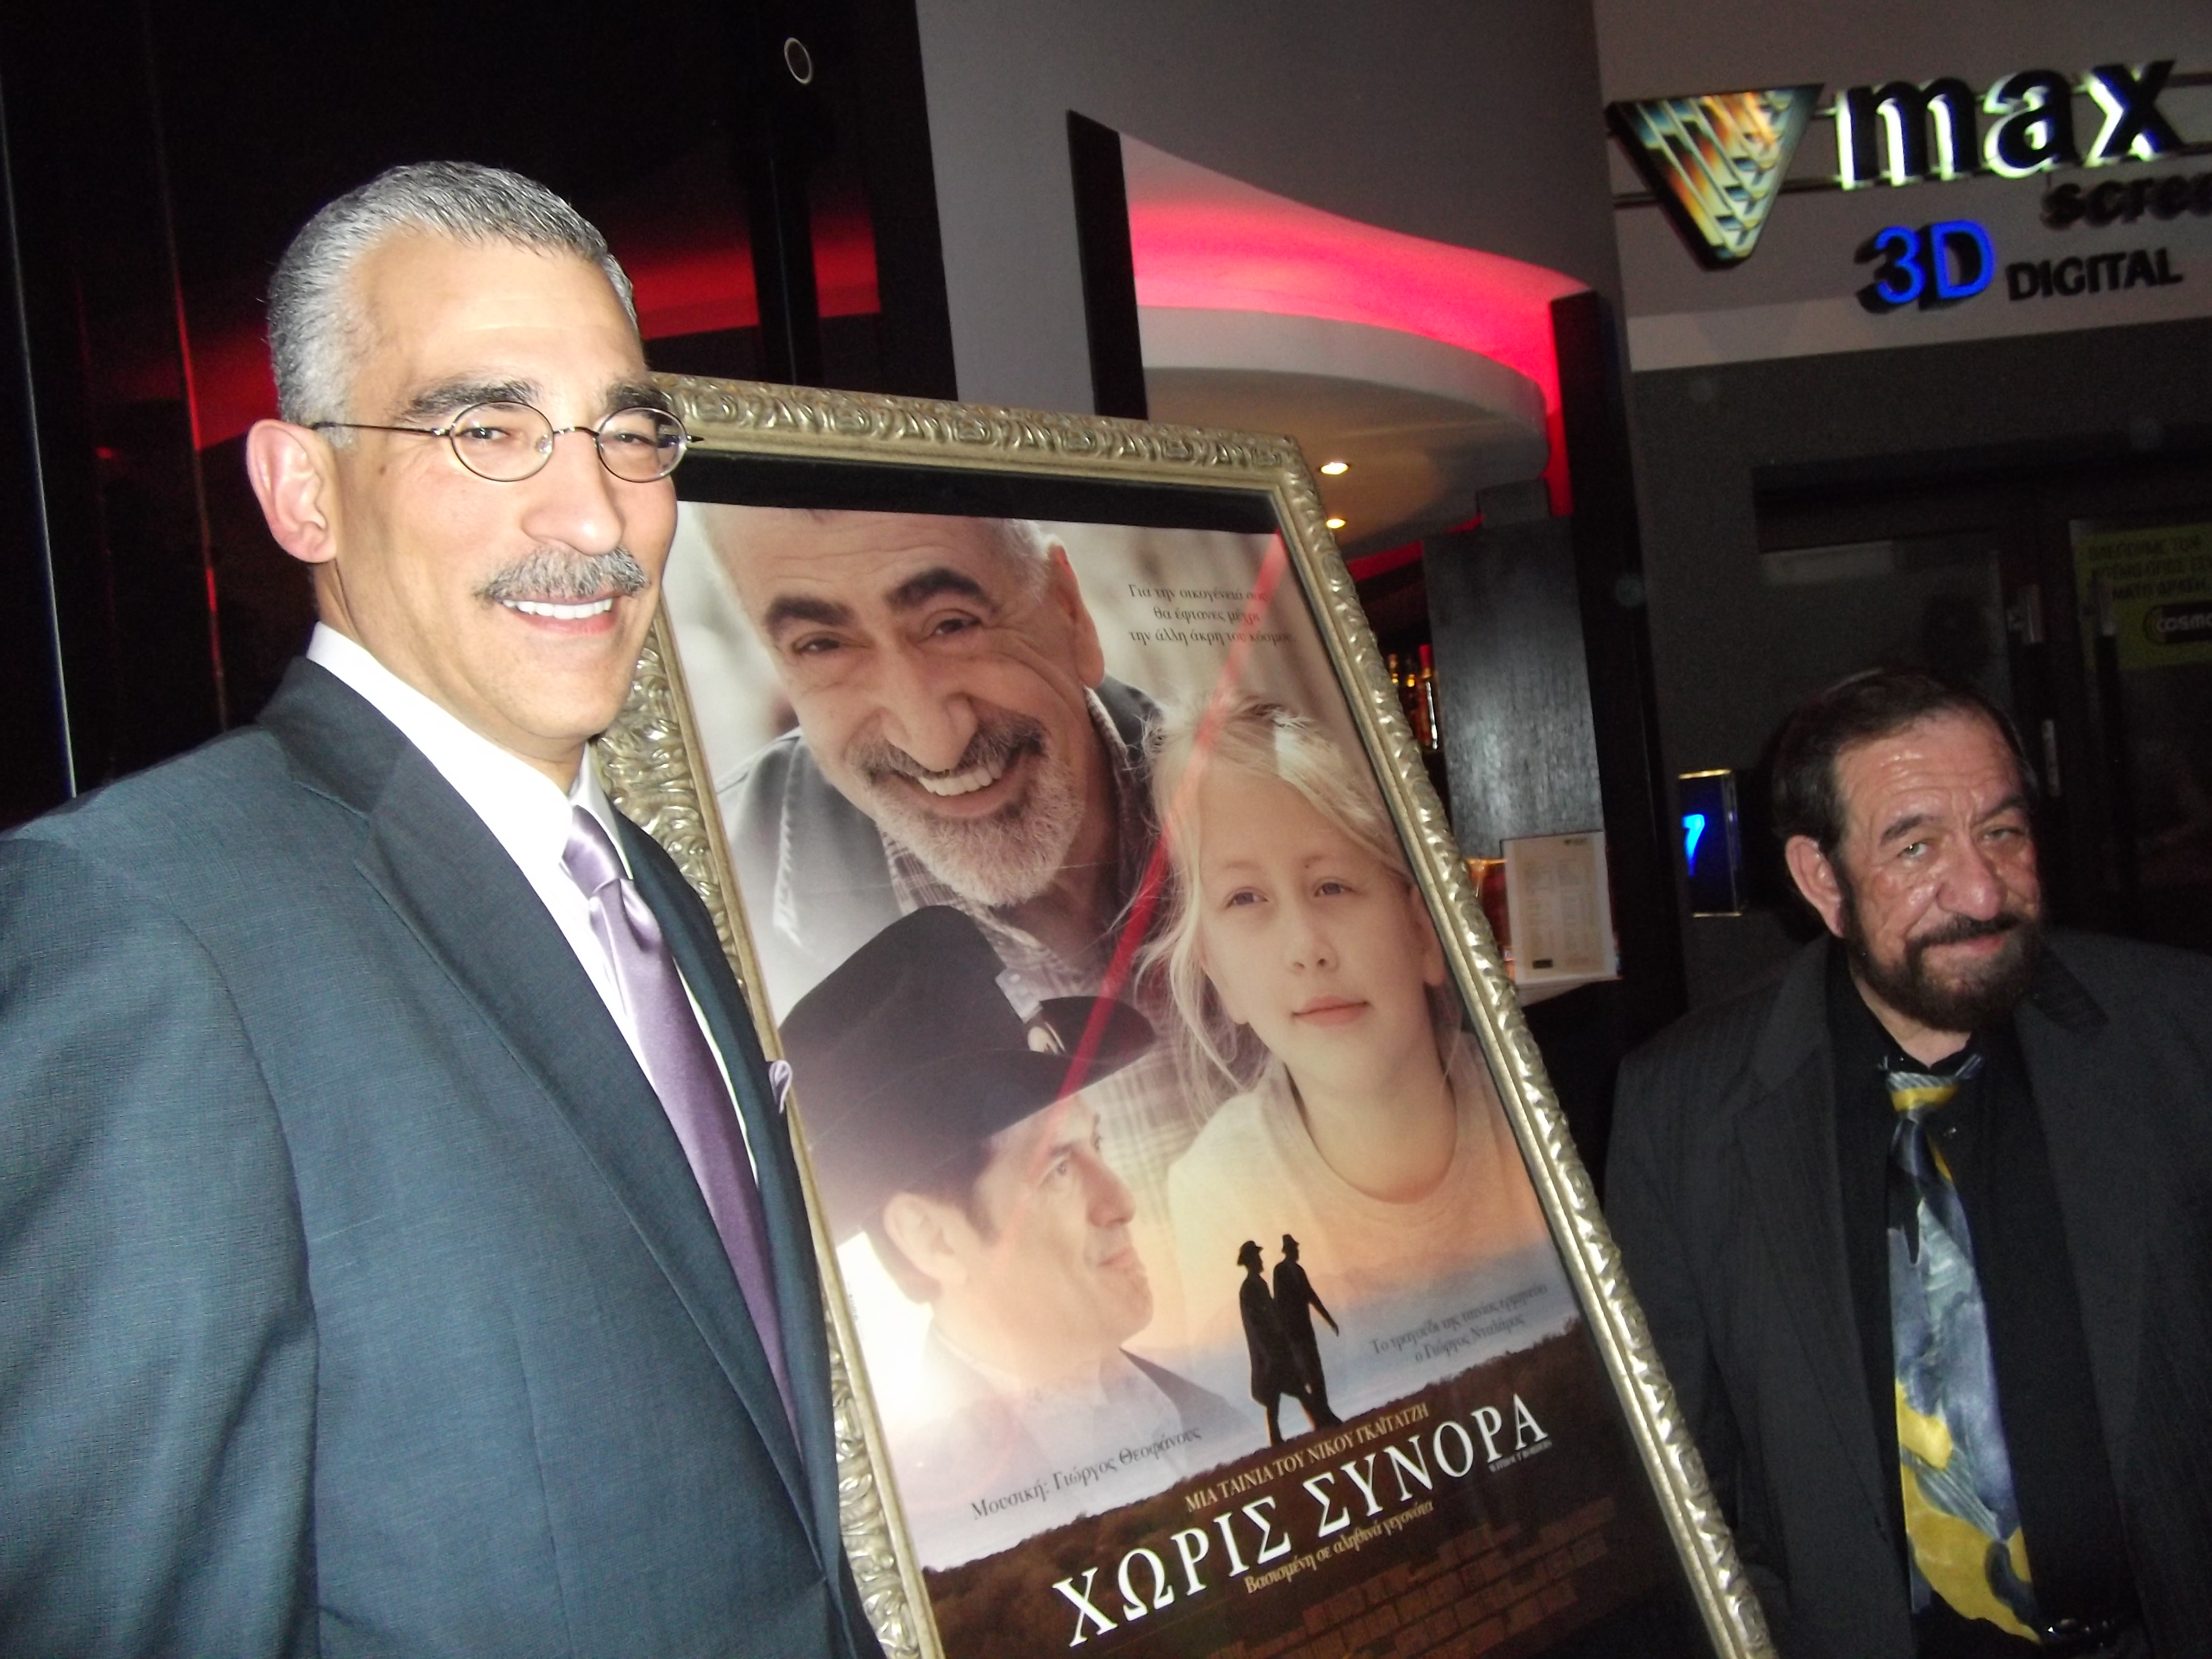 Jesse & Actor Paul Lillios next to movie poster at 